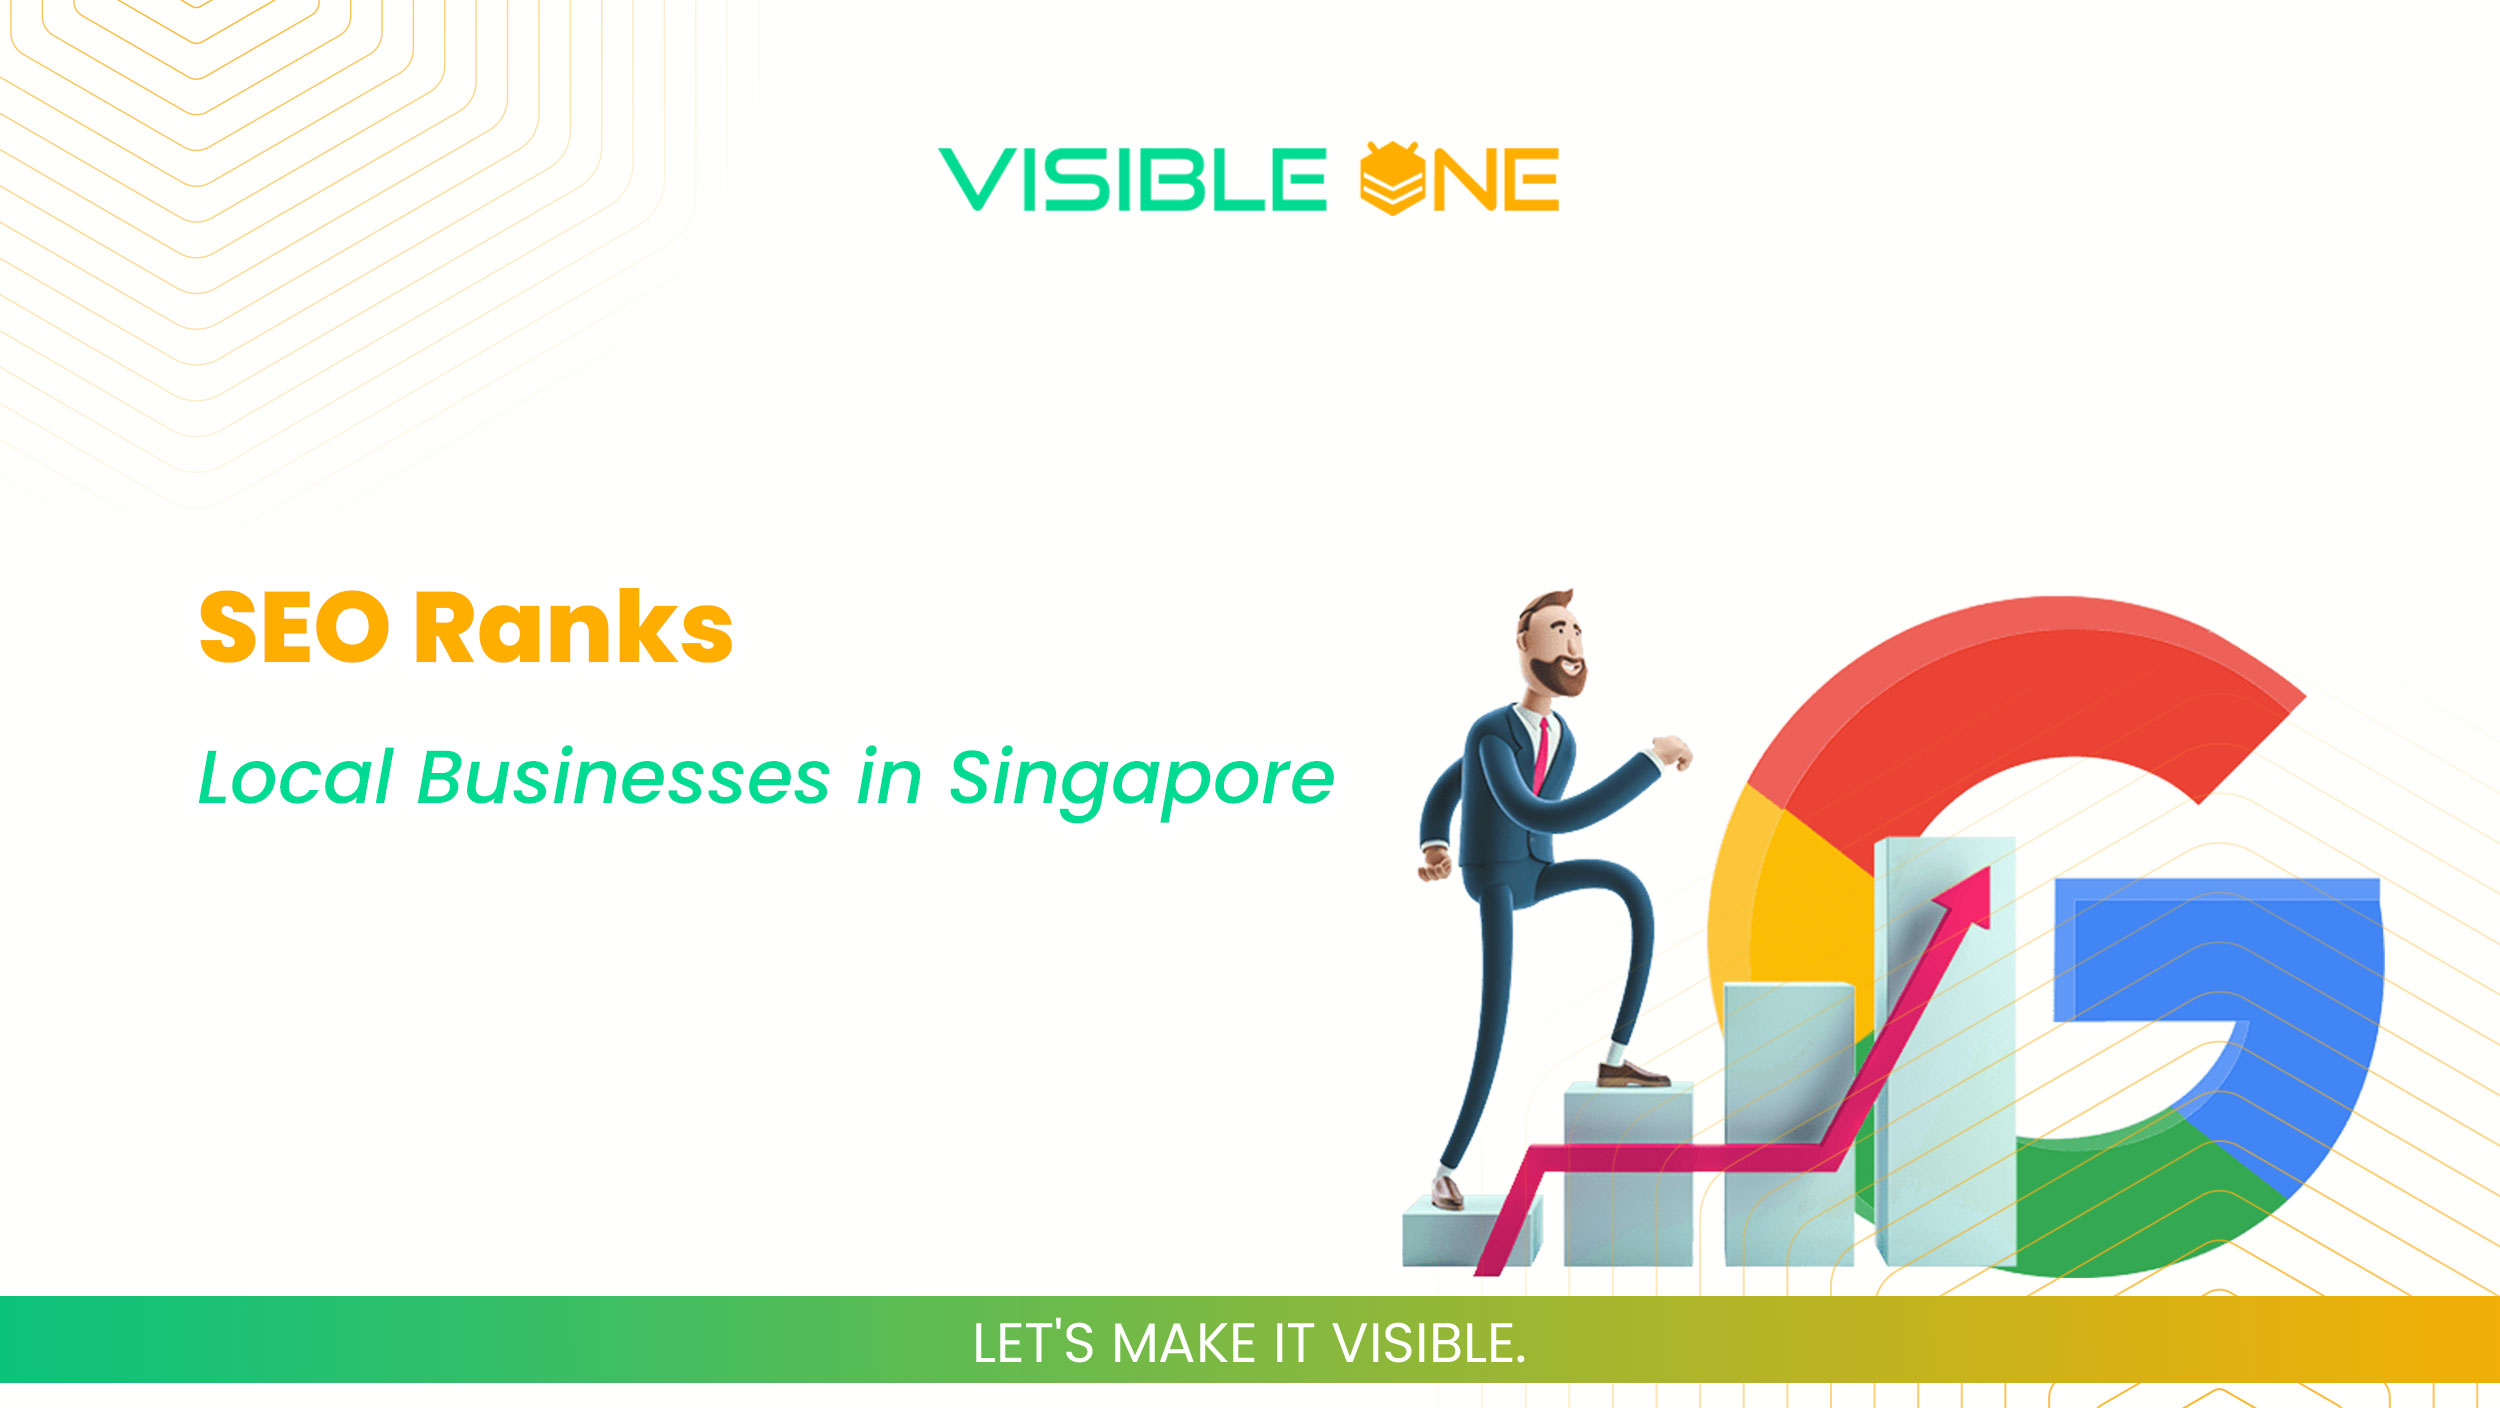 Illustration of a man stepping up a growth chart with SEO Ranks and Local Businesses in Singapore highlighted